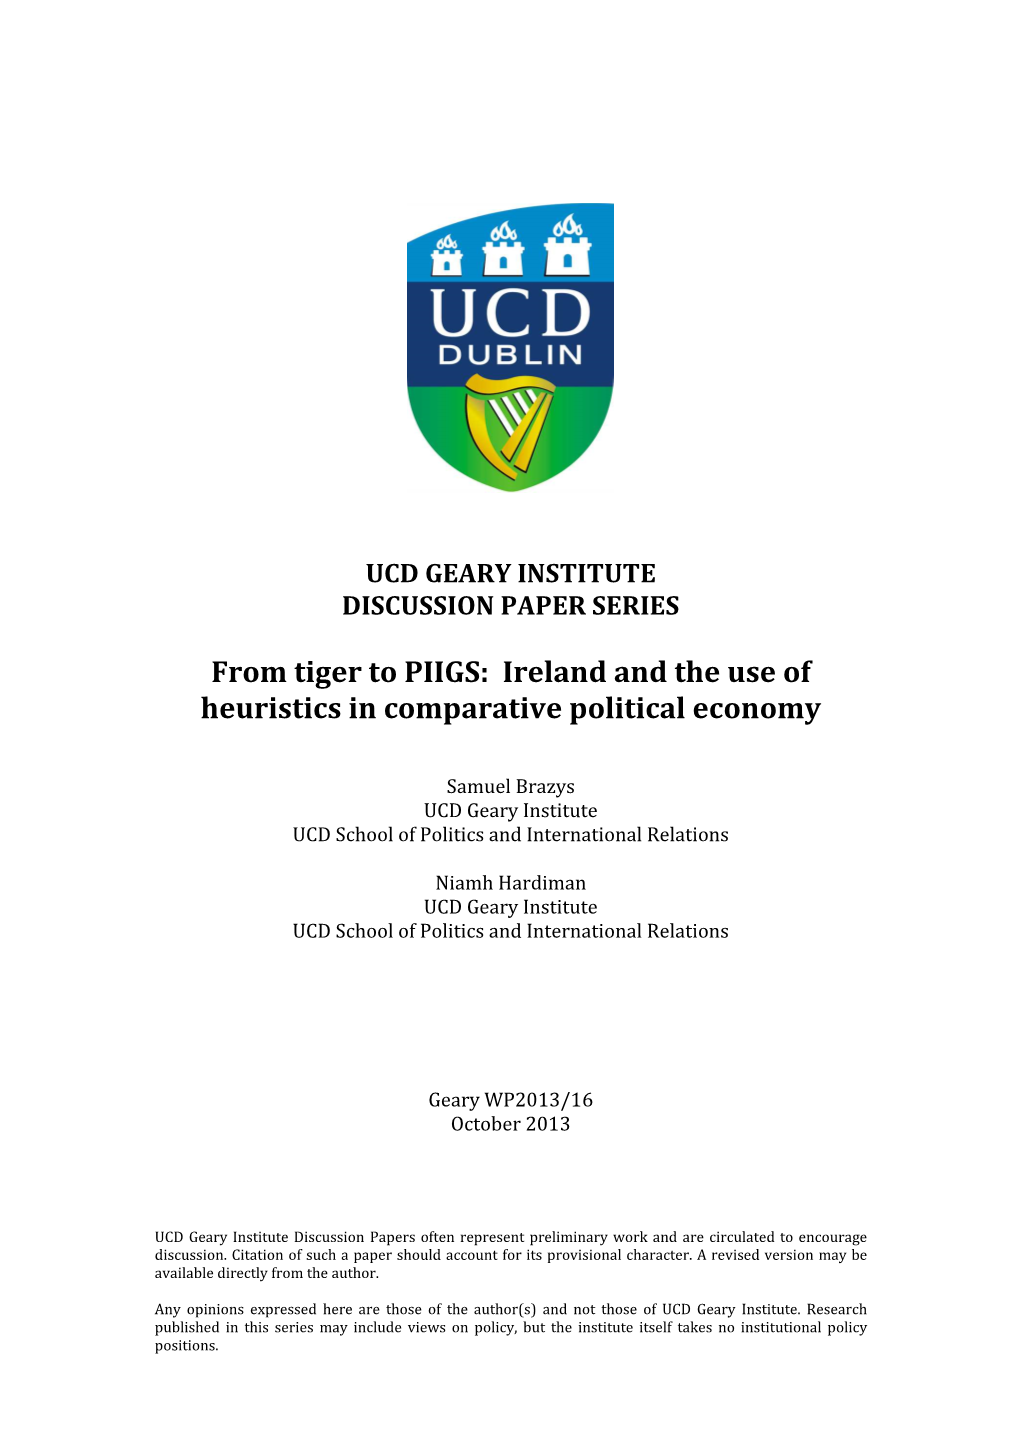 From Tiger to PIIGS: Ireland and the Use of Heuristics in Comparative Political Economy